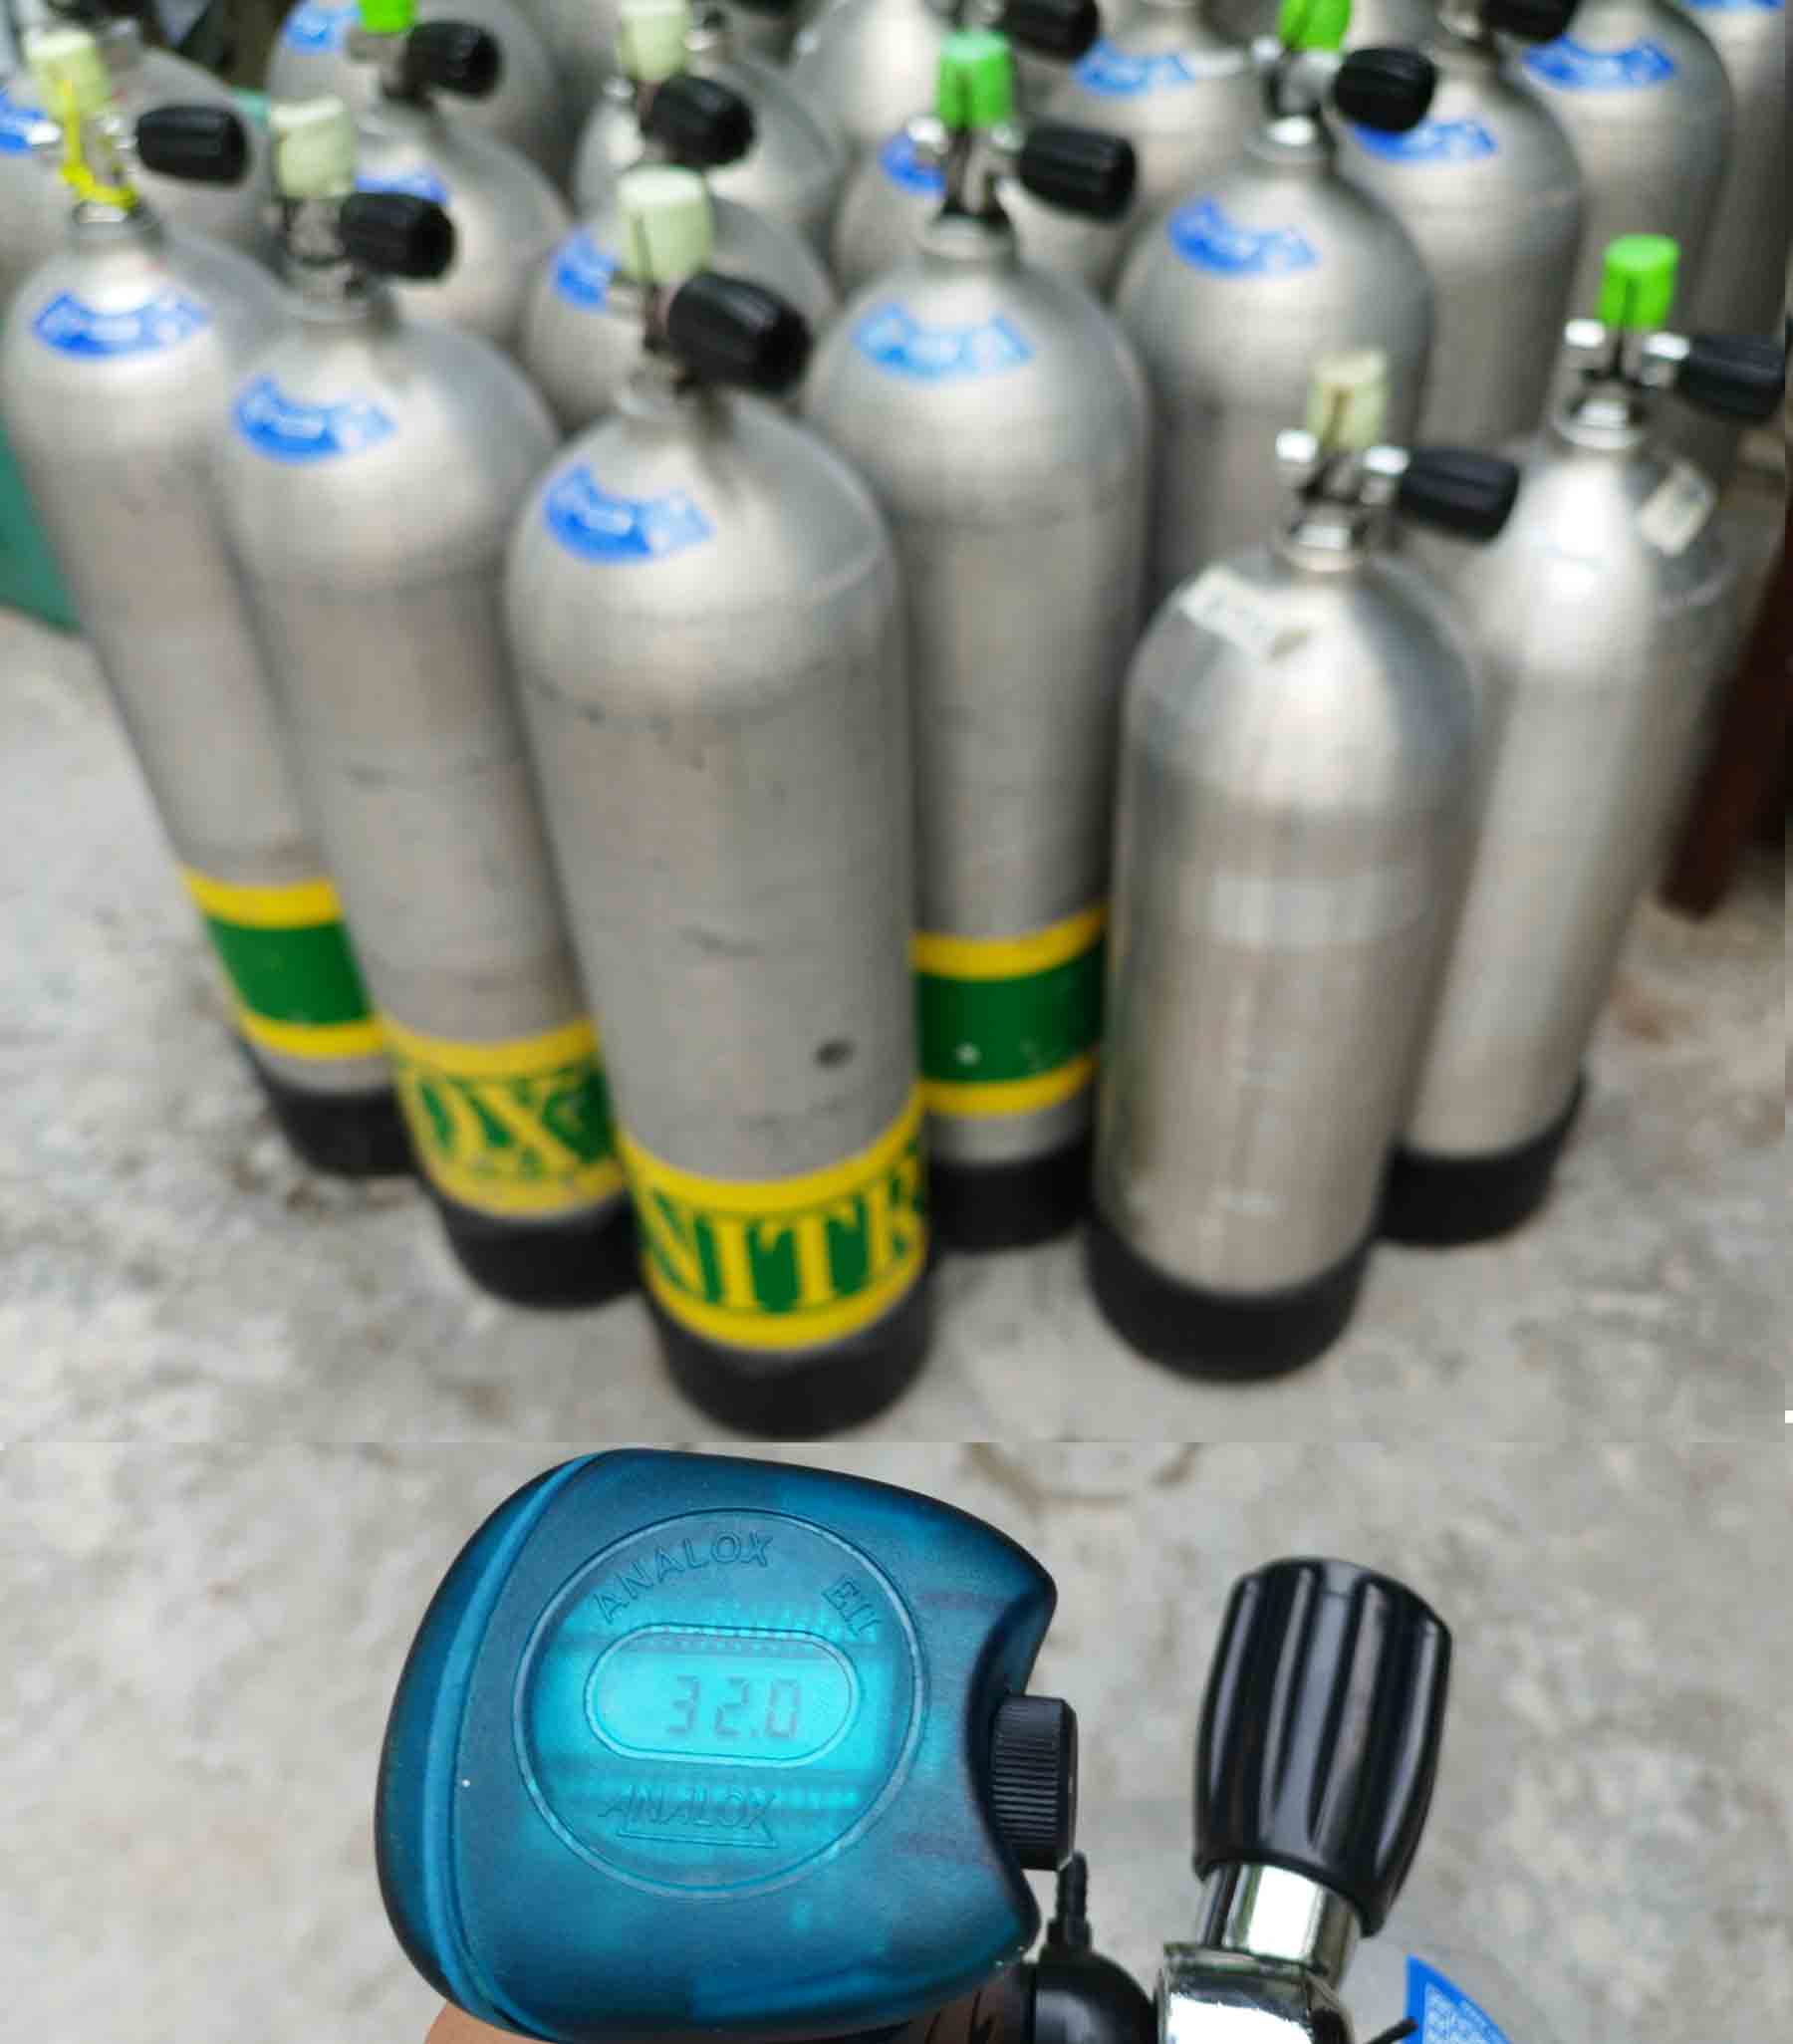 Nitrox tanks being oxygen analyzed during the Enriched Air Course in Bali